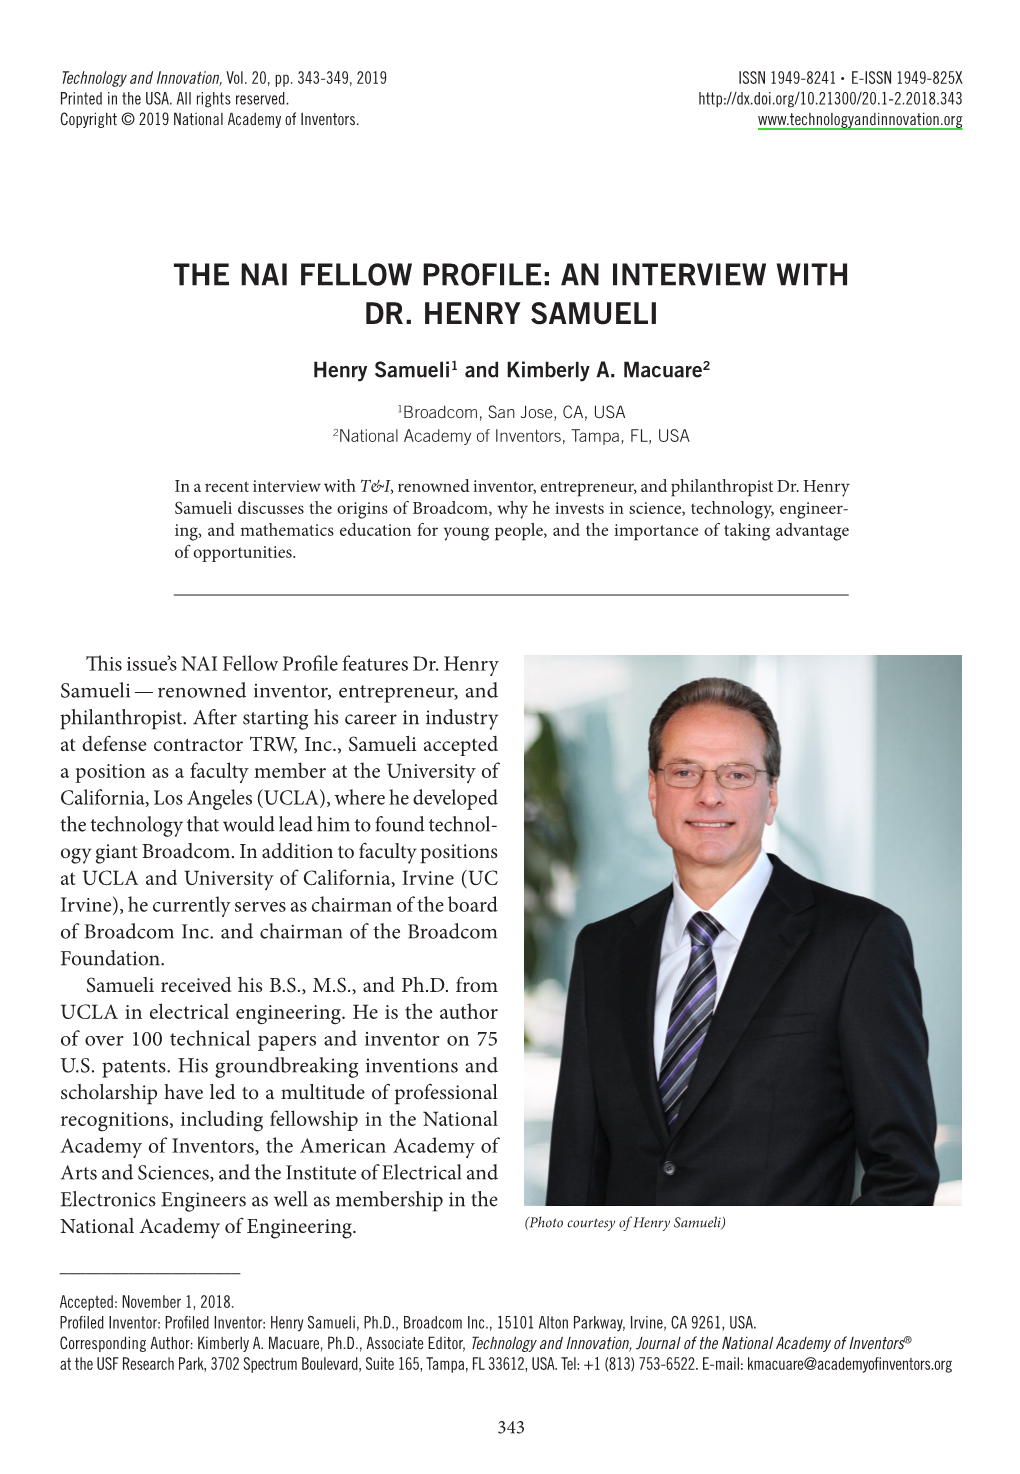 The Nai Fellow Profile: an Interview with Dr. Henry Samueli